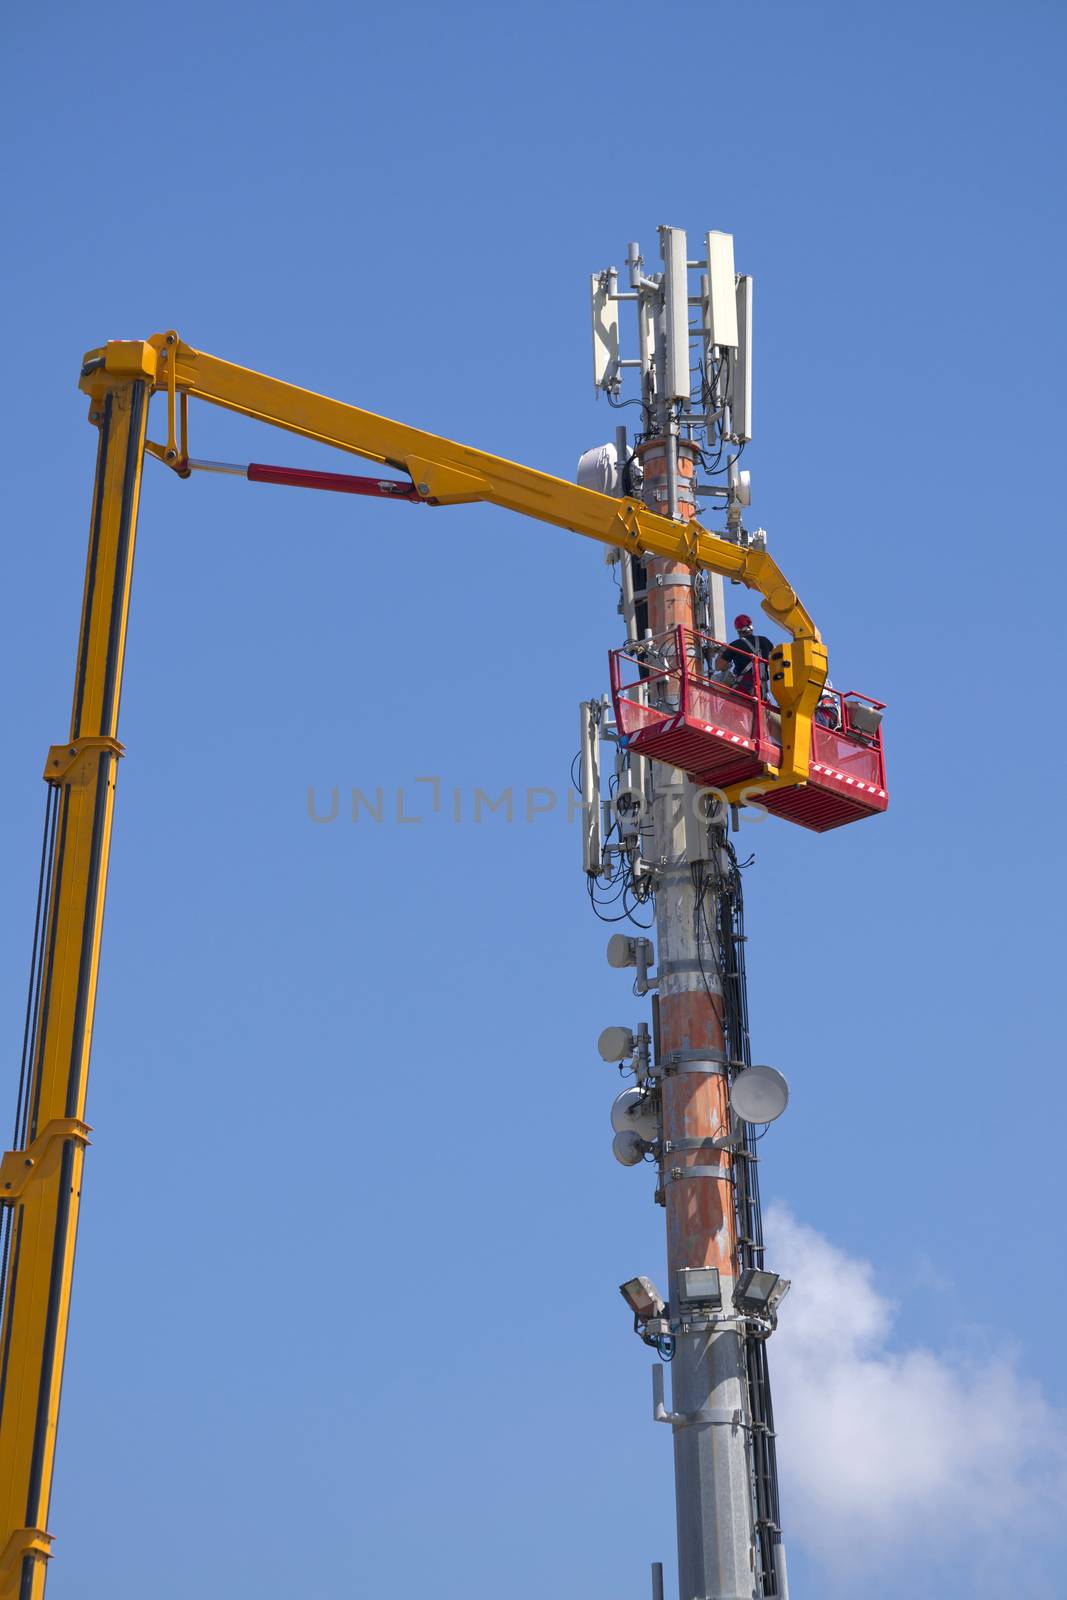 Maintenance to an antenna for communications  by fotografiche.eu